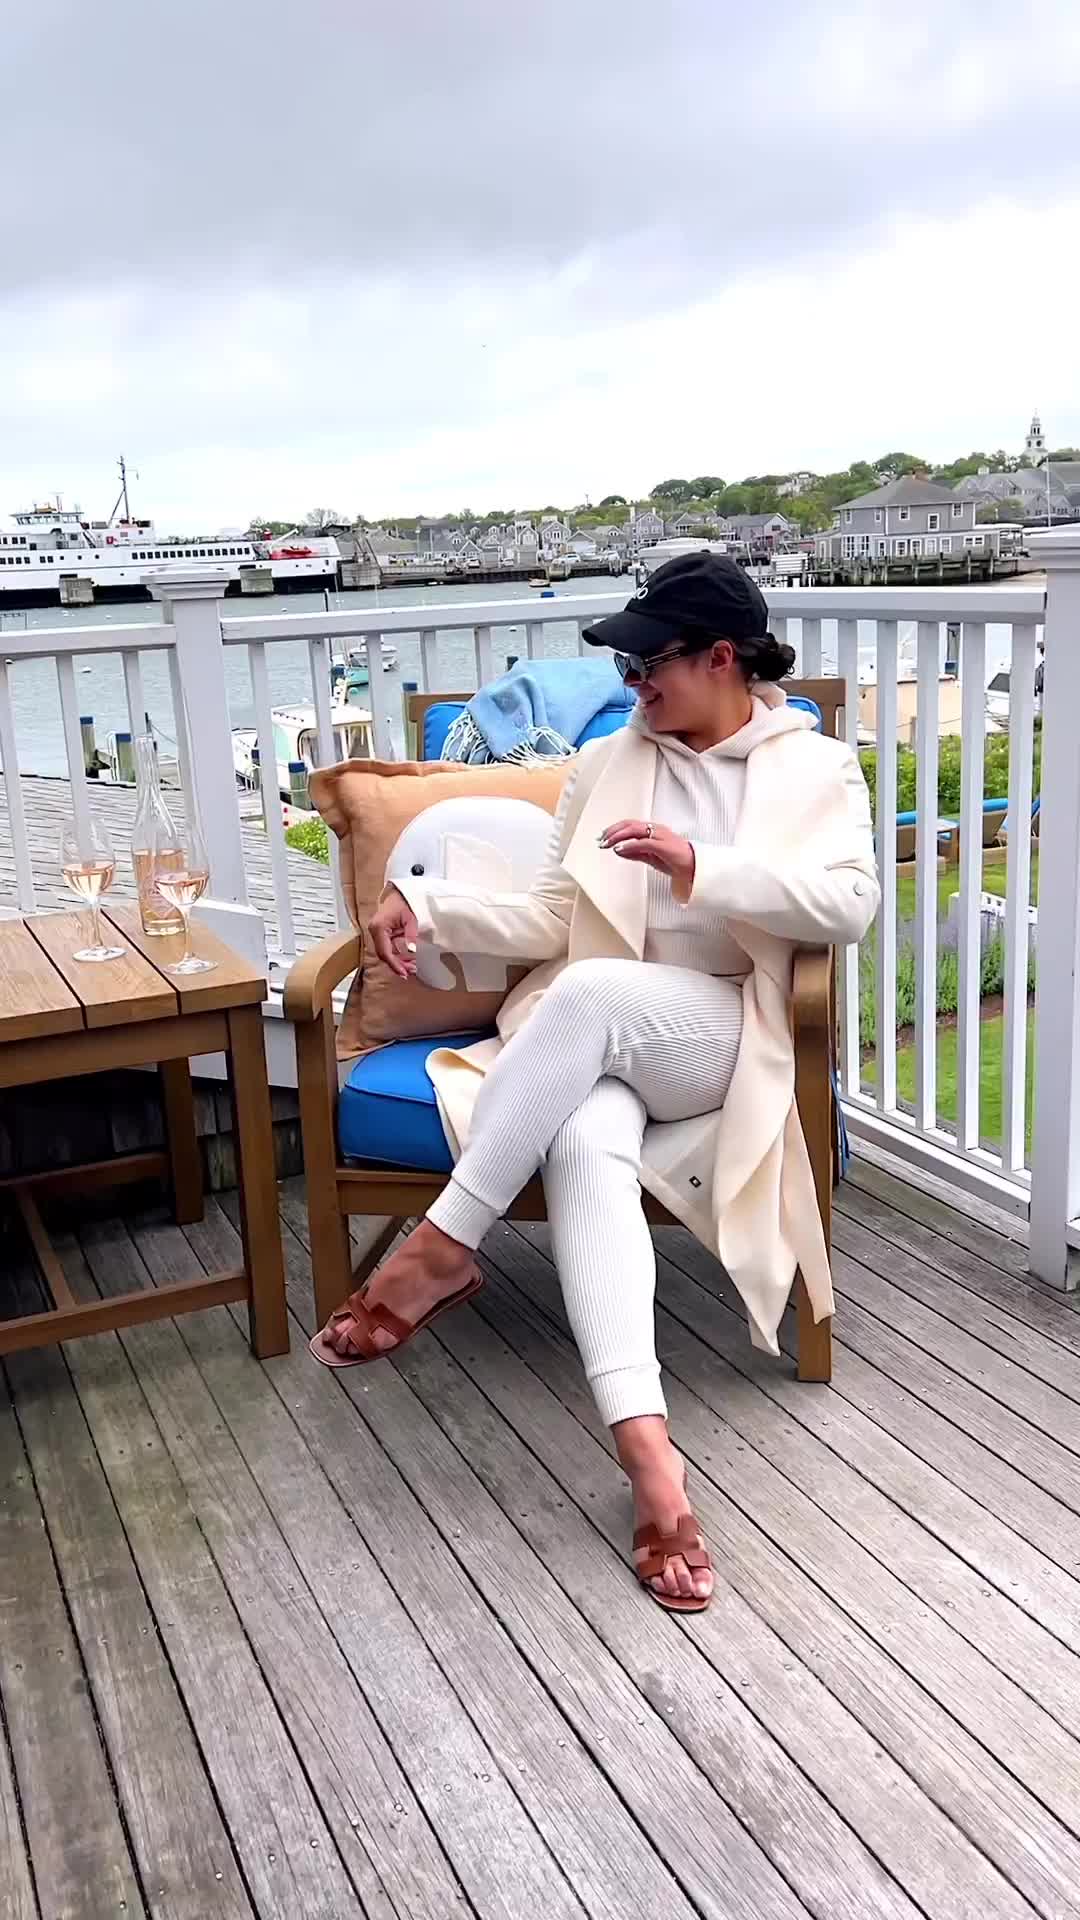 Long Weekend Ready in Nantucket: Style & Relaxation